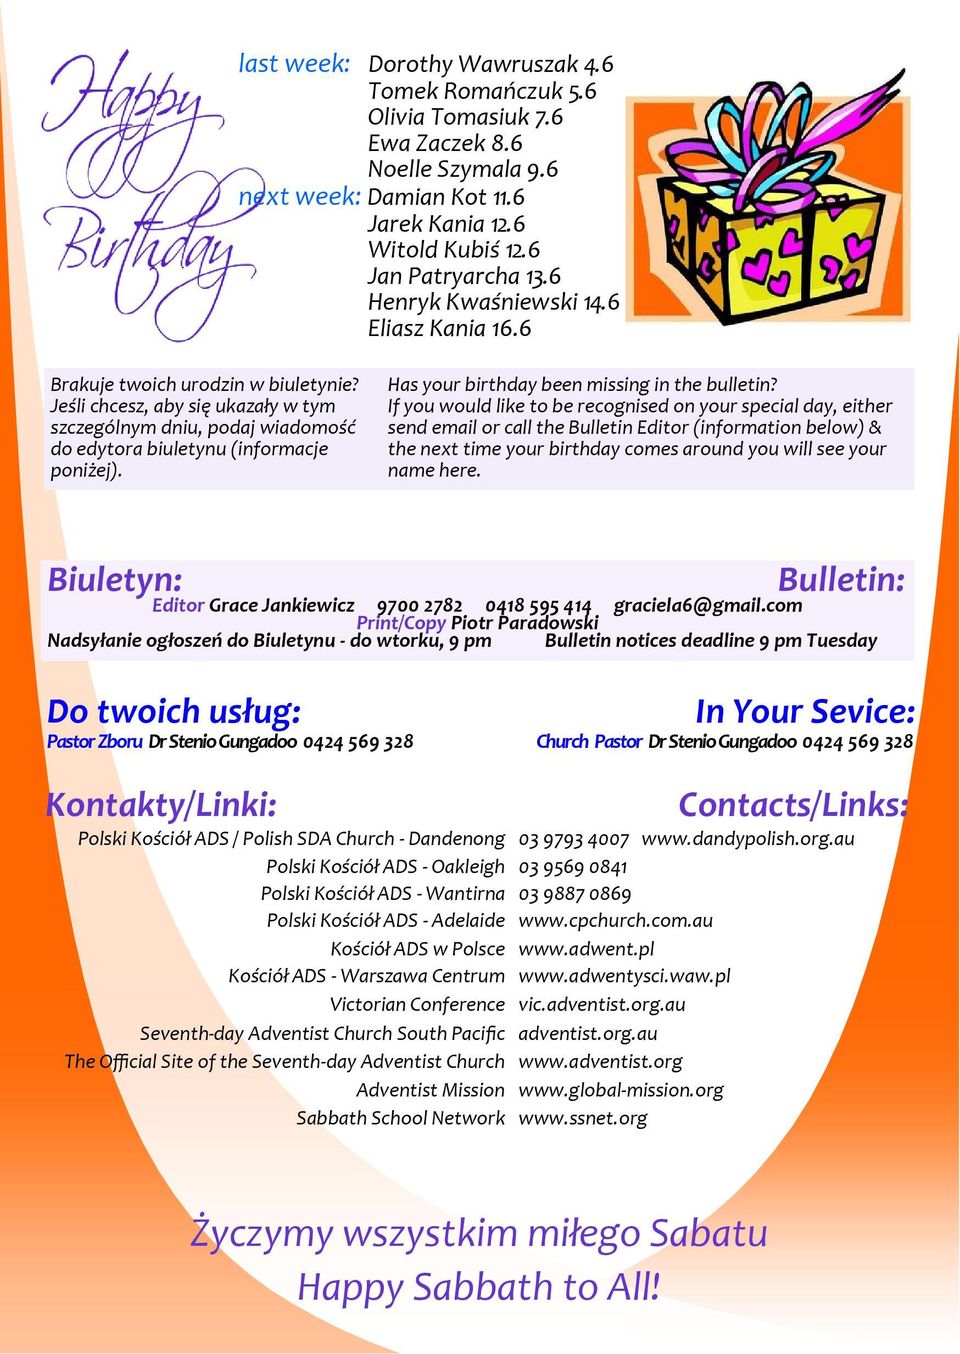 Has your birthday been missing in the bulletin?